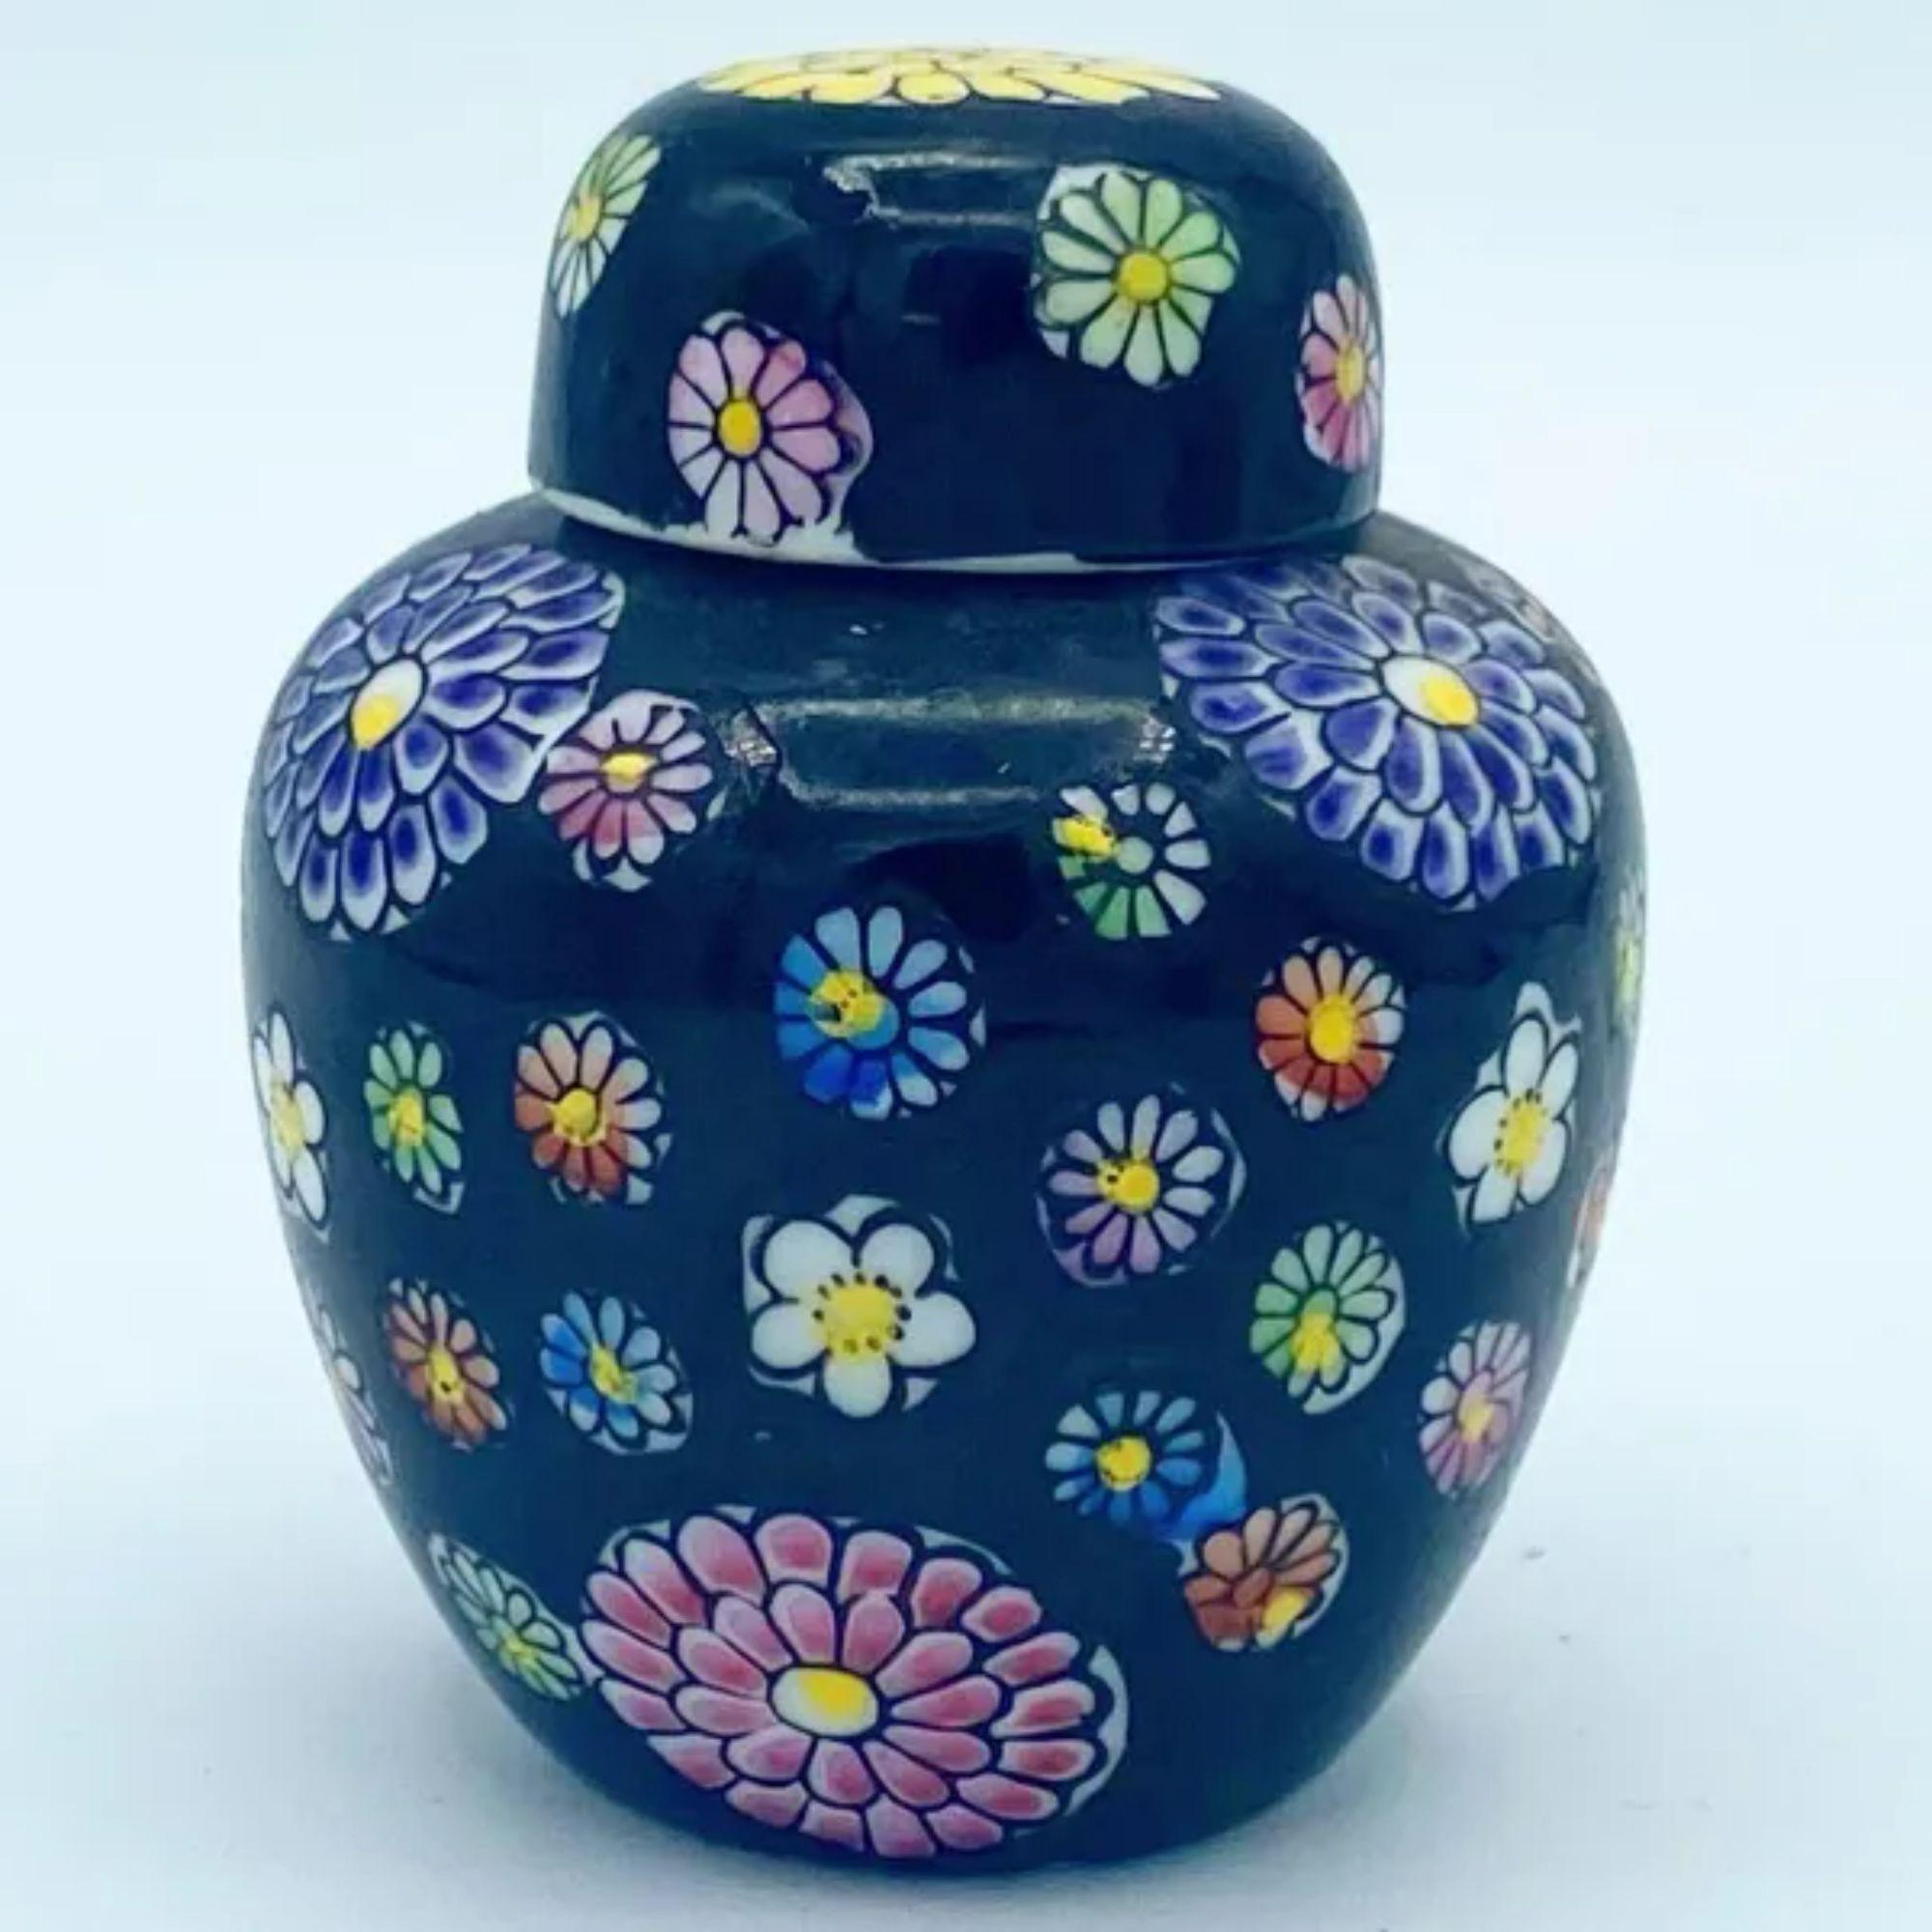 Only one of the jars has a lid.

Additional information: 
Material: Porcelain
Color: Black
Style: Asian Antique, Vintage
Time Period: 1970s
Place of origin: Japan
Dimension: 2.25” L x 2.25” D x 3” H